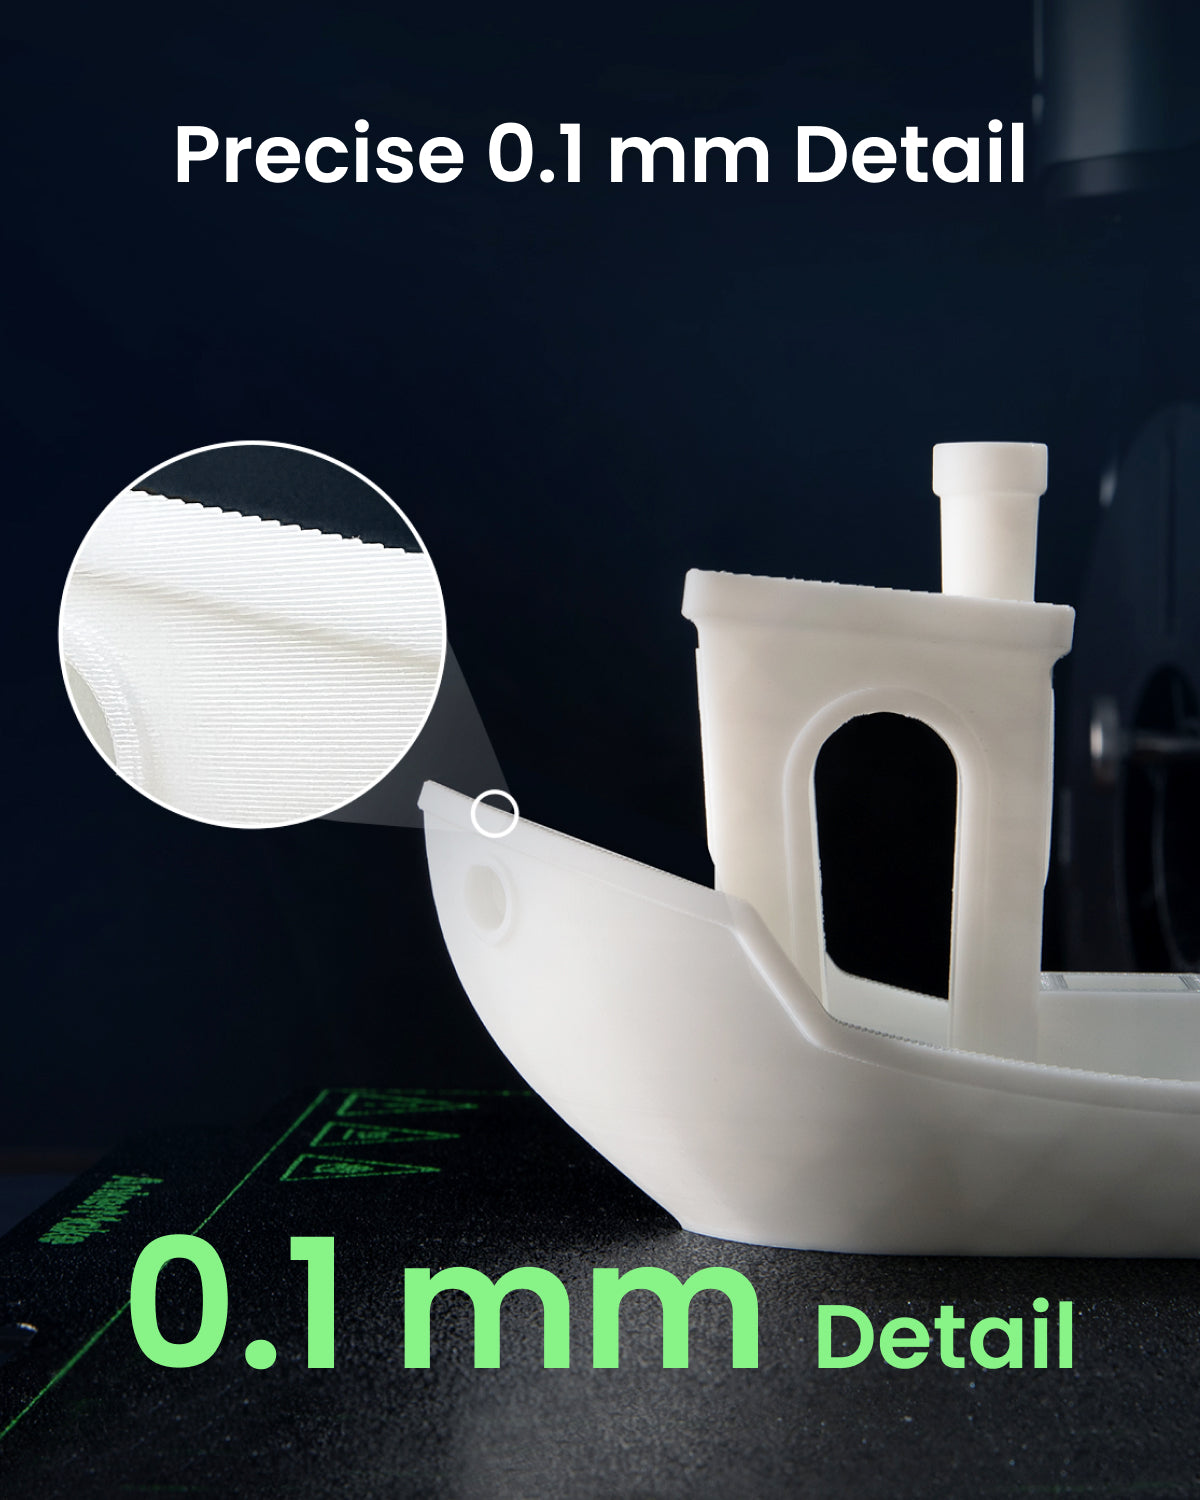 M5 + 3-Month Accessory Pack + 6 kg of Filament